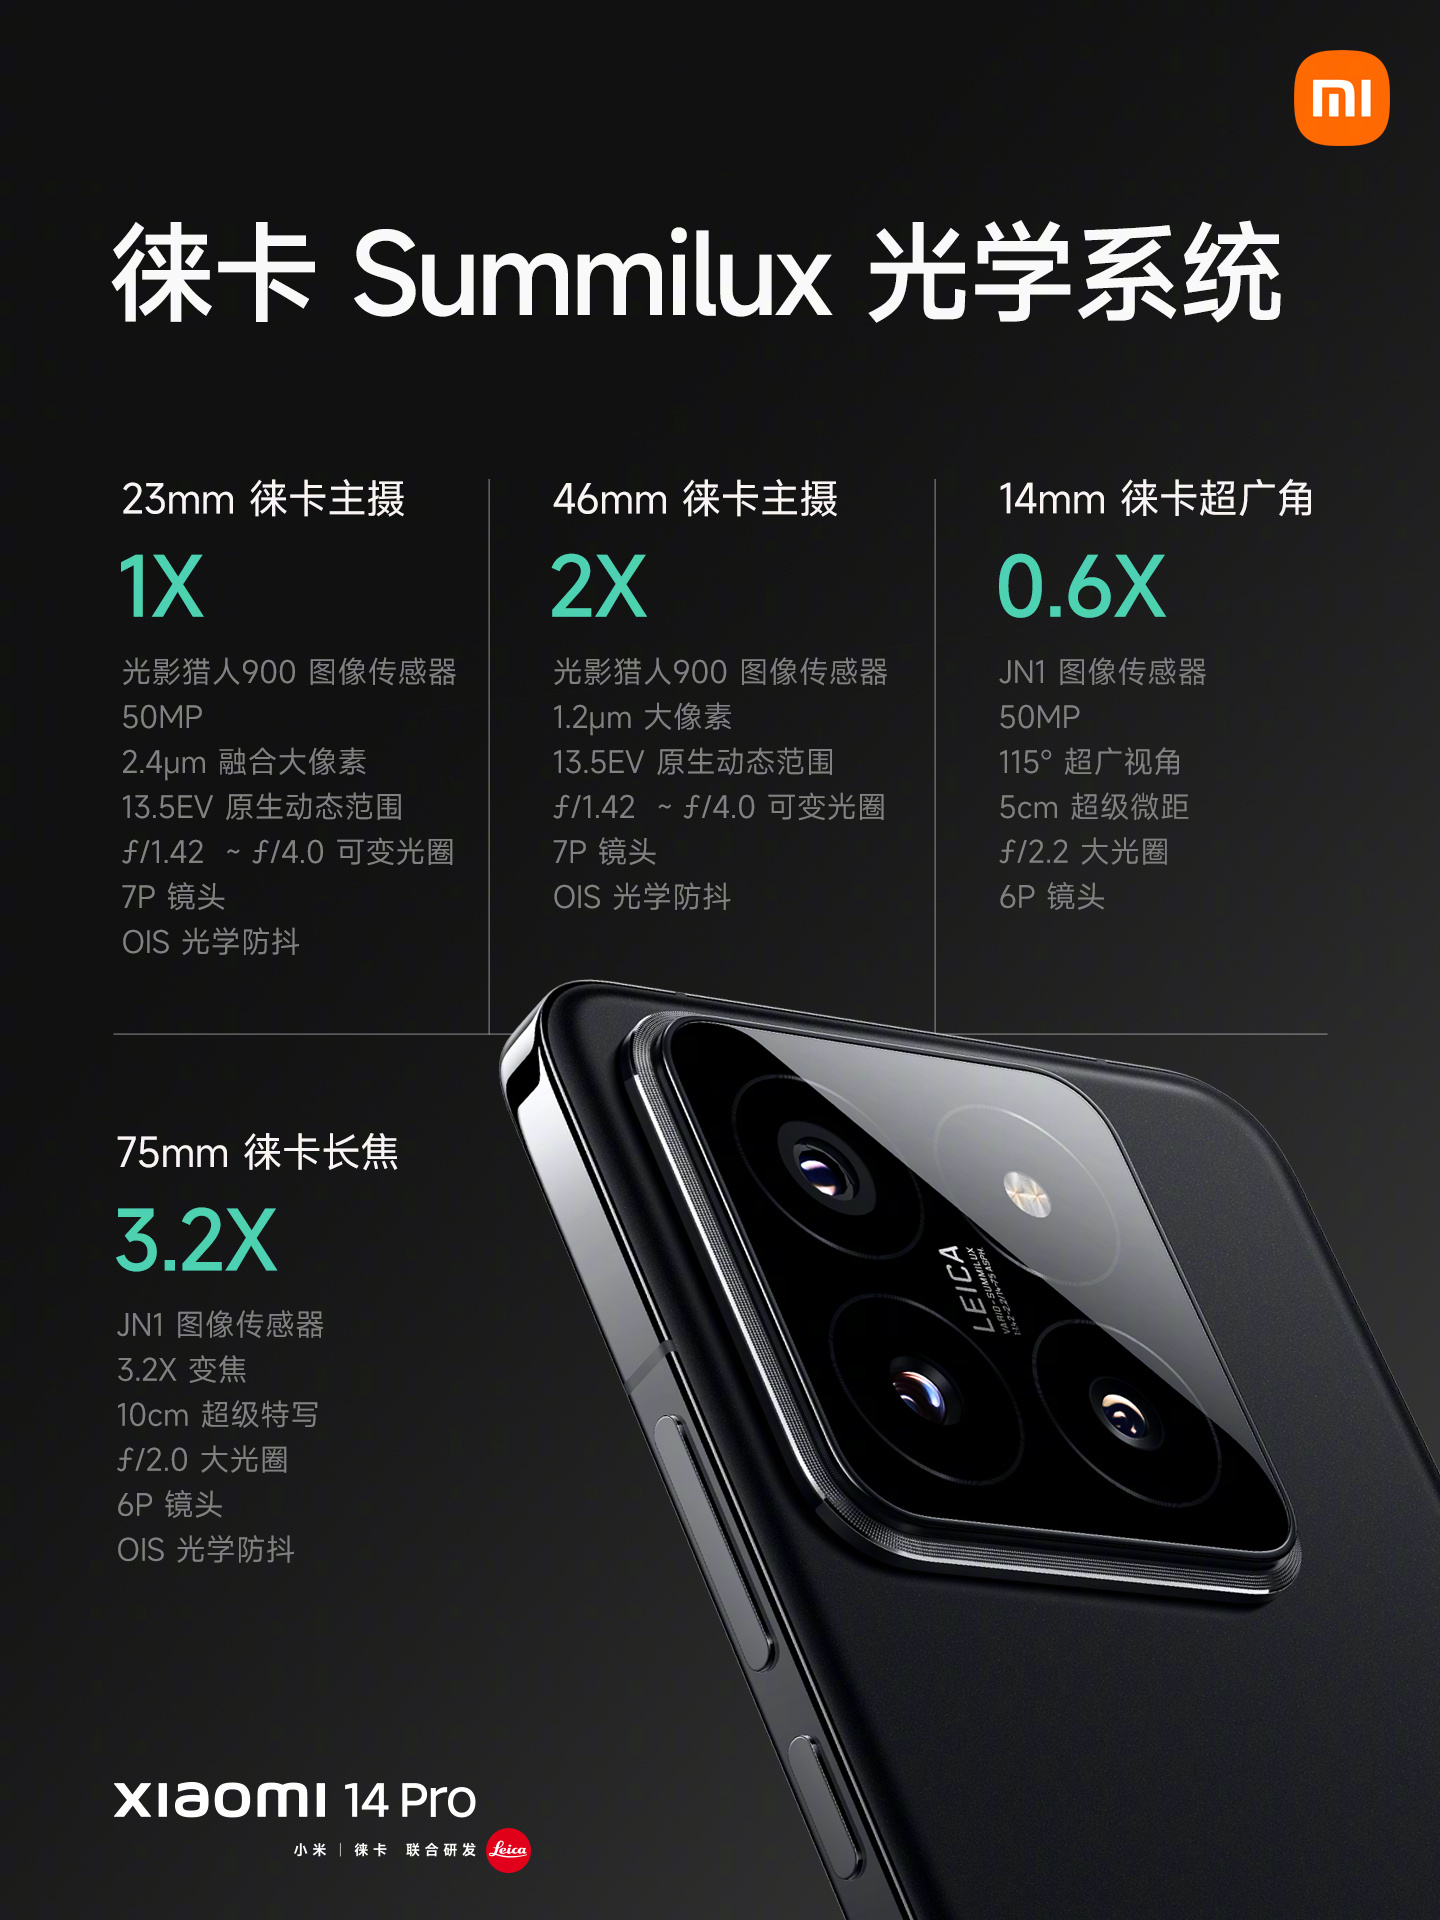 NEW] Xiaomi 14 Pro 5G /S8 GEN 3 /LEICA 3 MAIN 50MP CAMERA /120w+50w Charge  /120HZ LTPO AMOLED (Playstore inside)